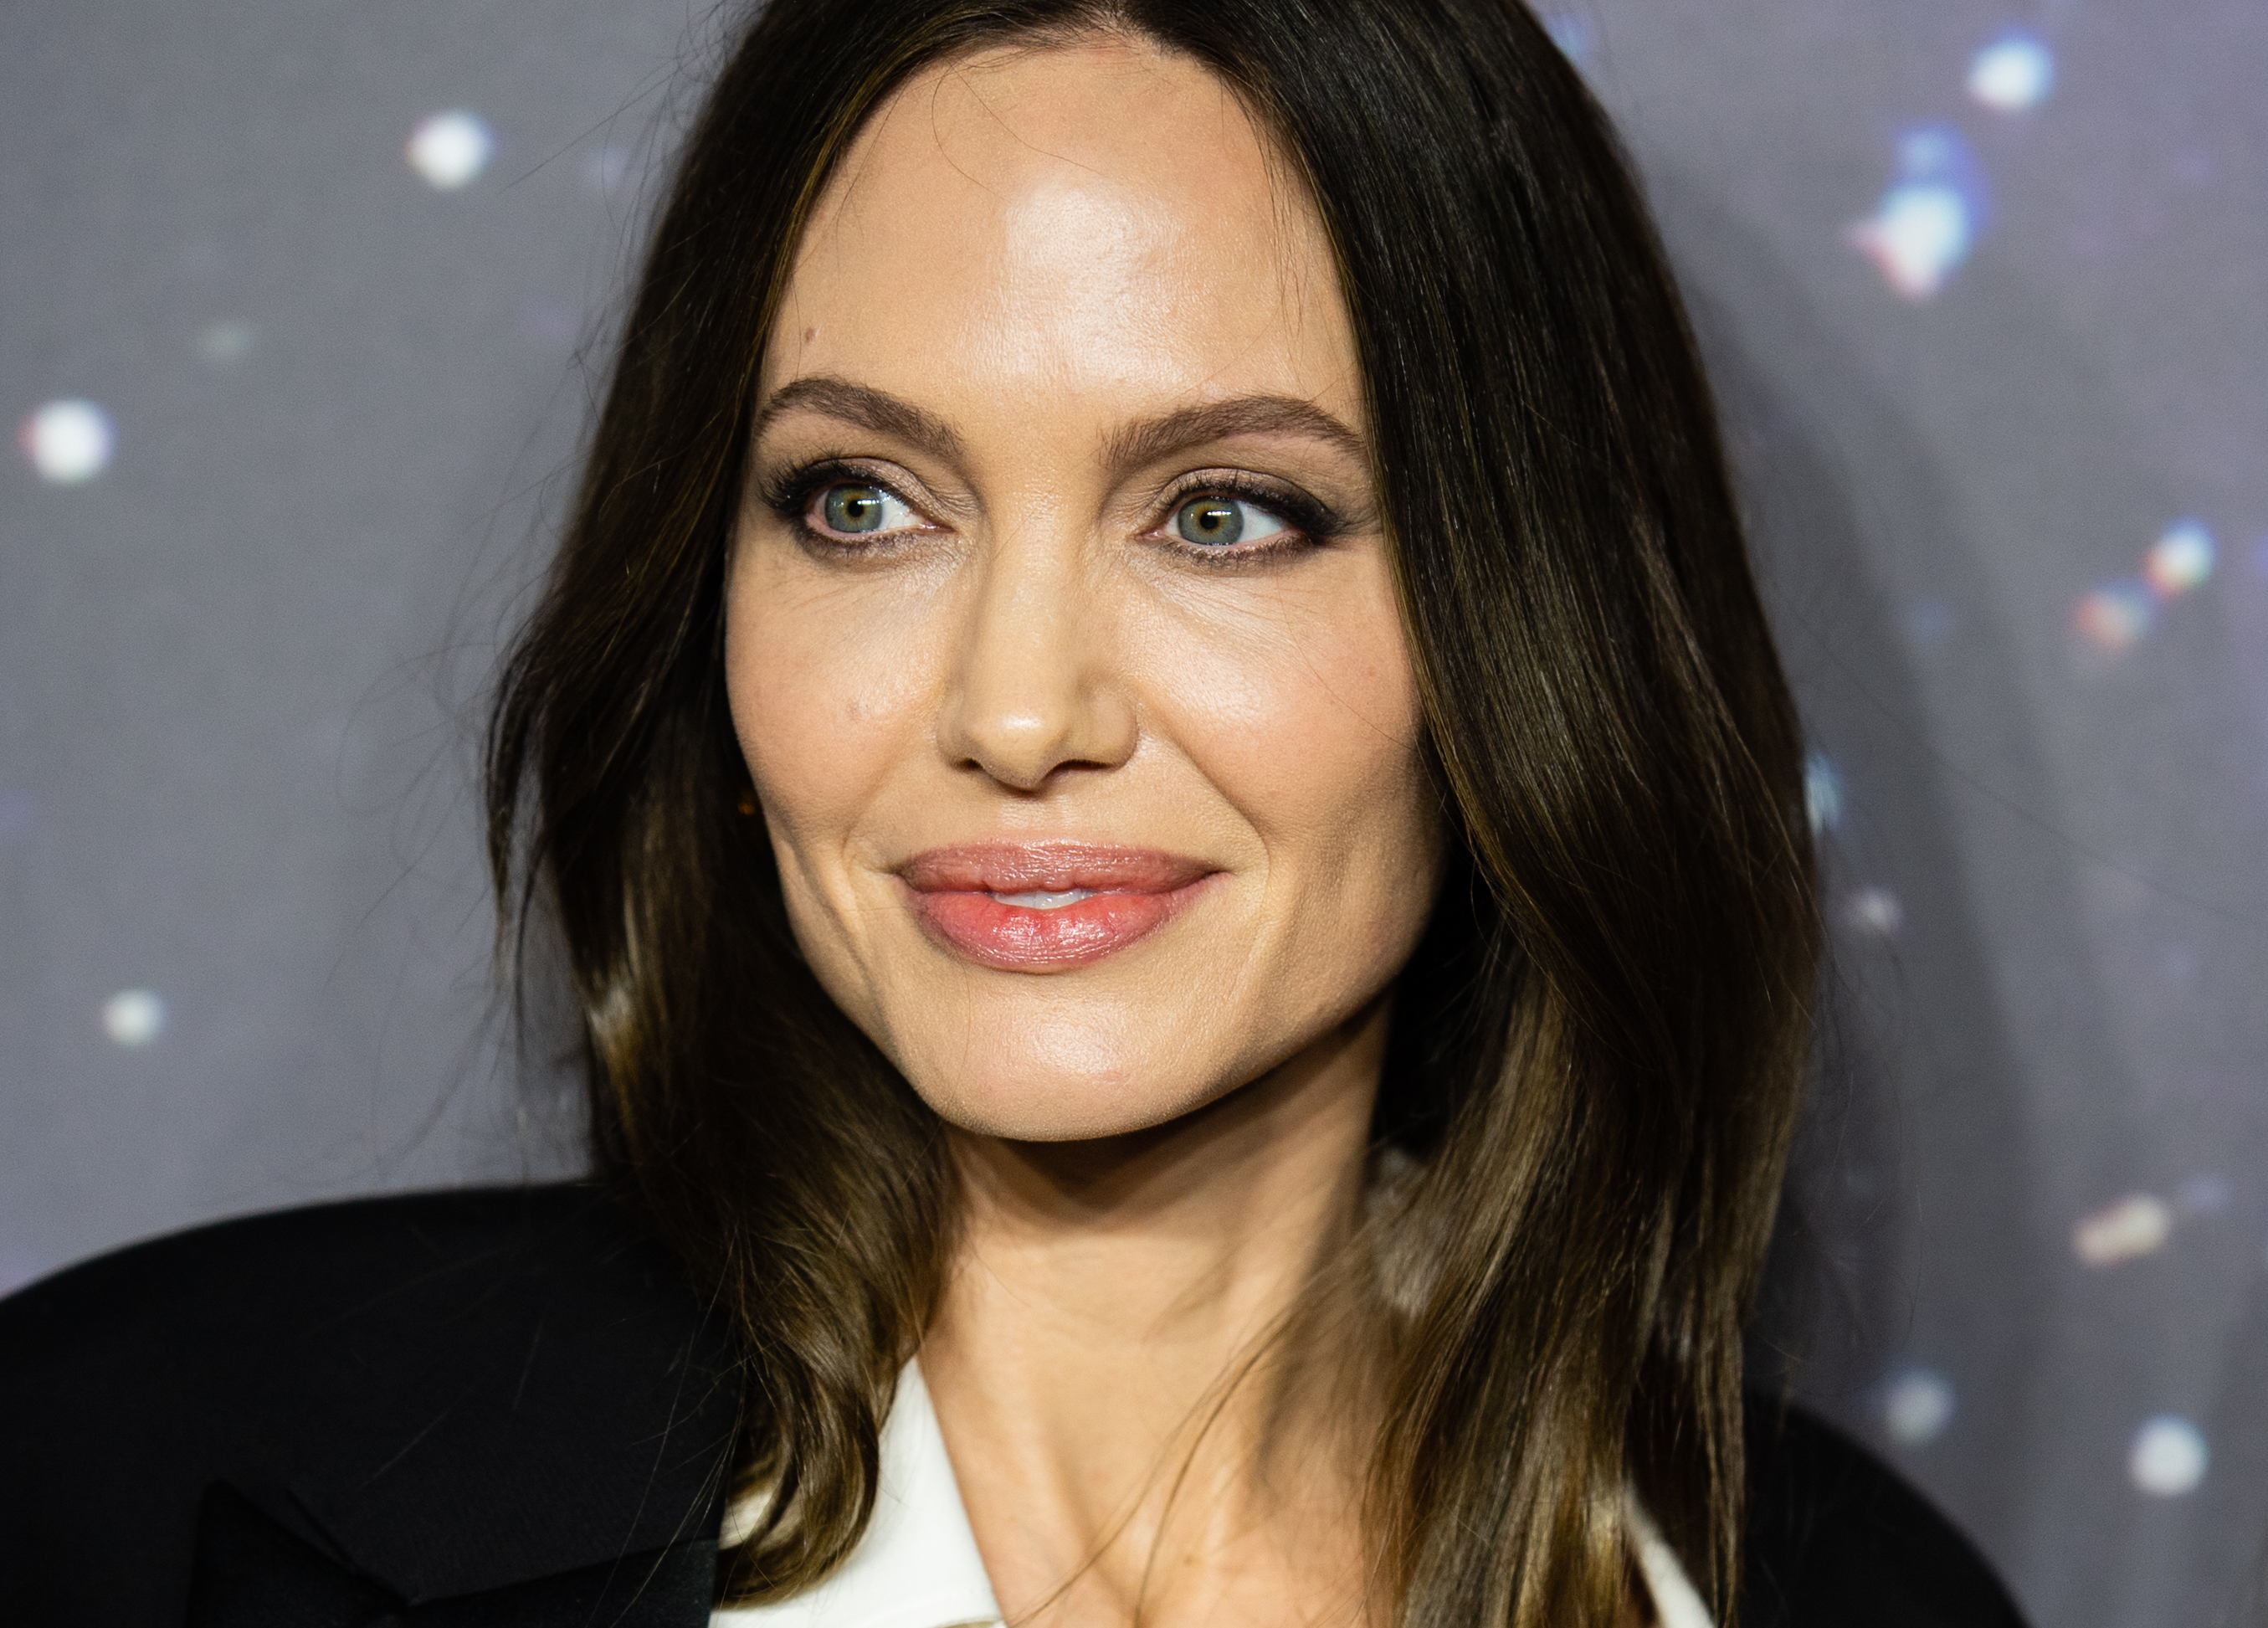 Angelina Jolie at the "The Eternals" UK premiere on October 27, 2021, in London, England | Source: Getty Images